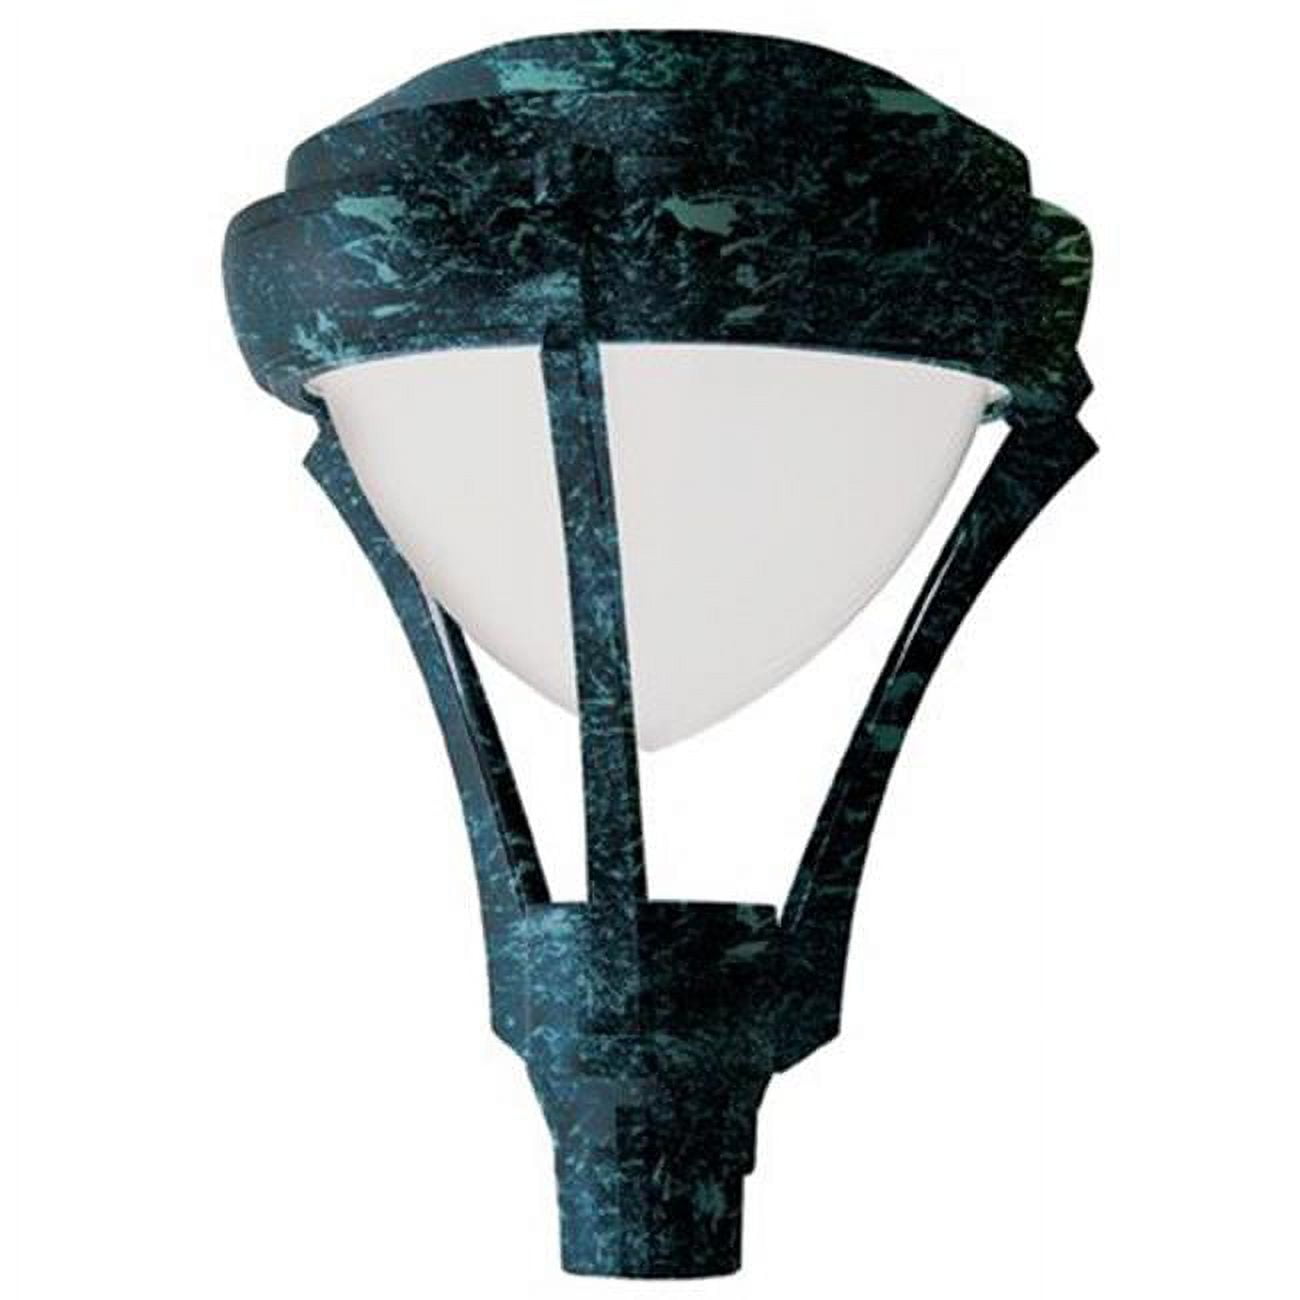 Picture of Dabmar Lighting GM590-VG-INC 120W 120V Powder Coated Cast Aluminum Post Top Light Fixture, Verde Green - 27.95 x 21.65 x 21.65 in.